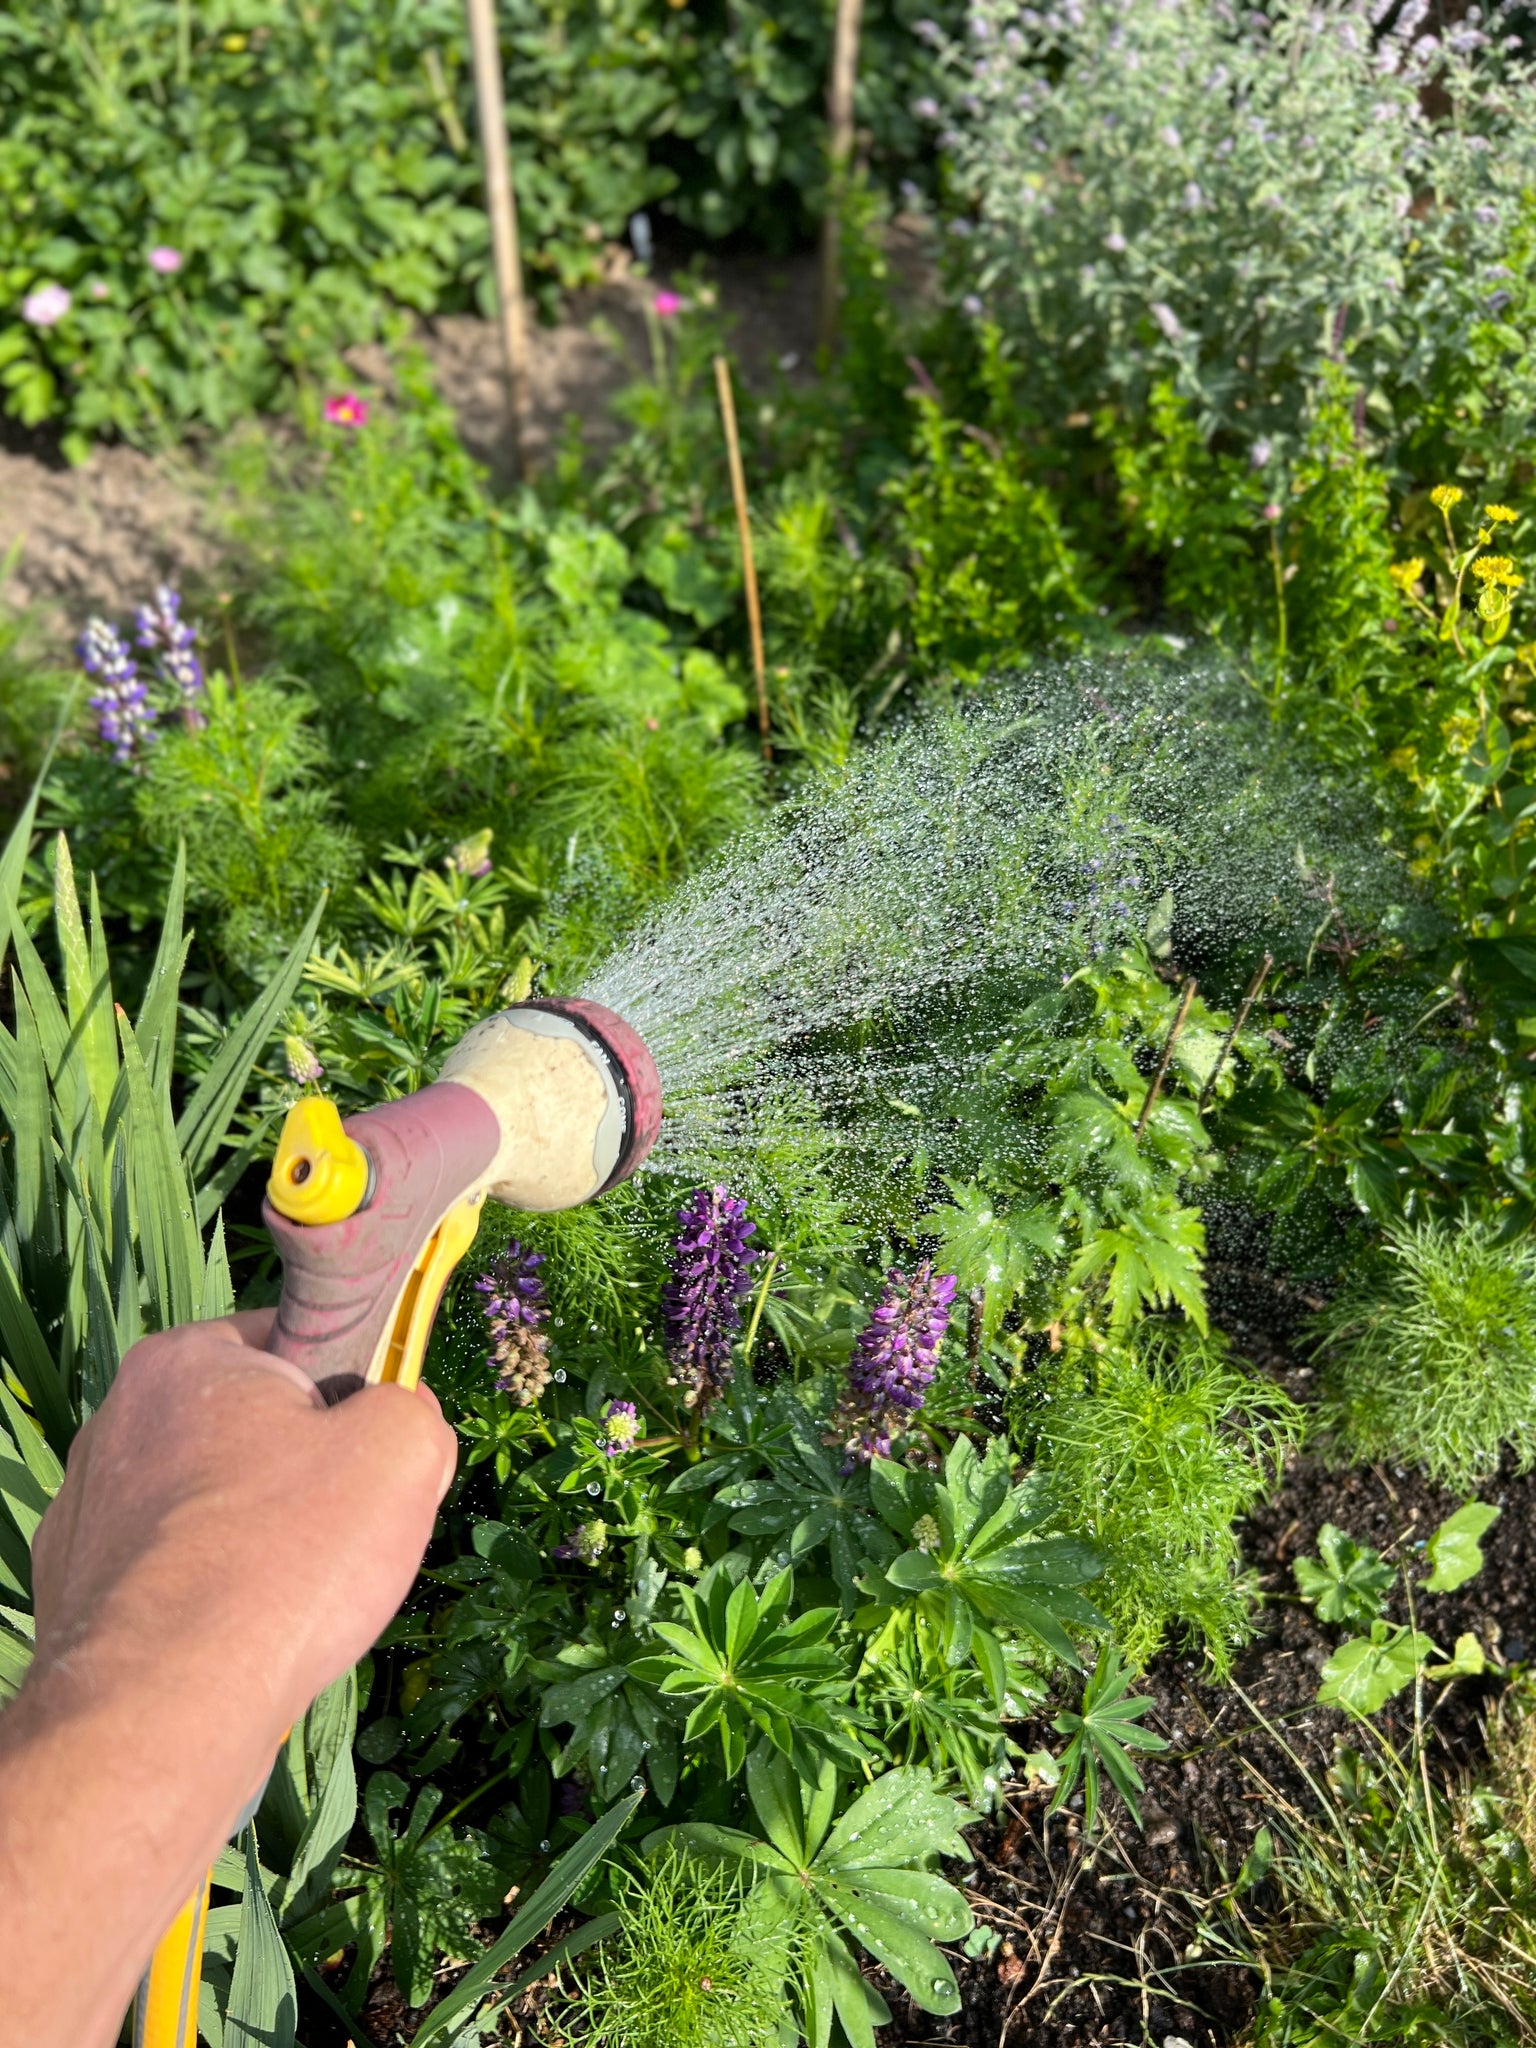 Watering garden with hose shower attachment